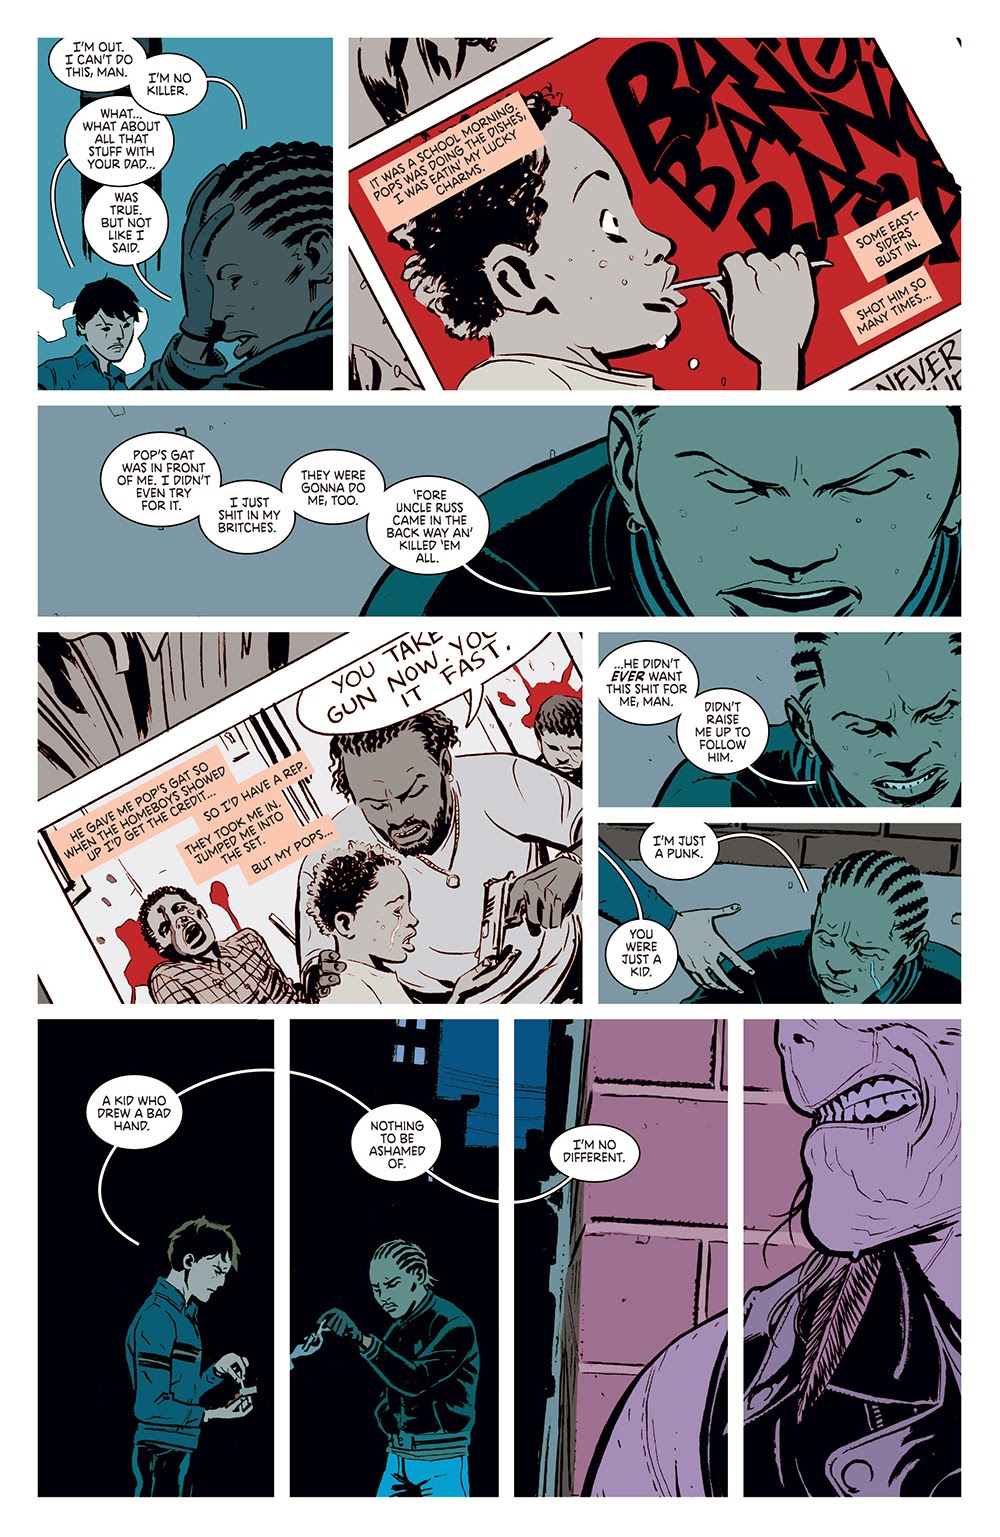 The Courses Are Killer in DEADLY CLASS - Image Comics